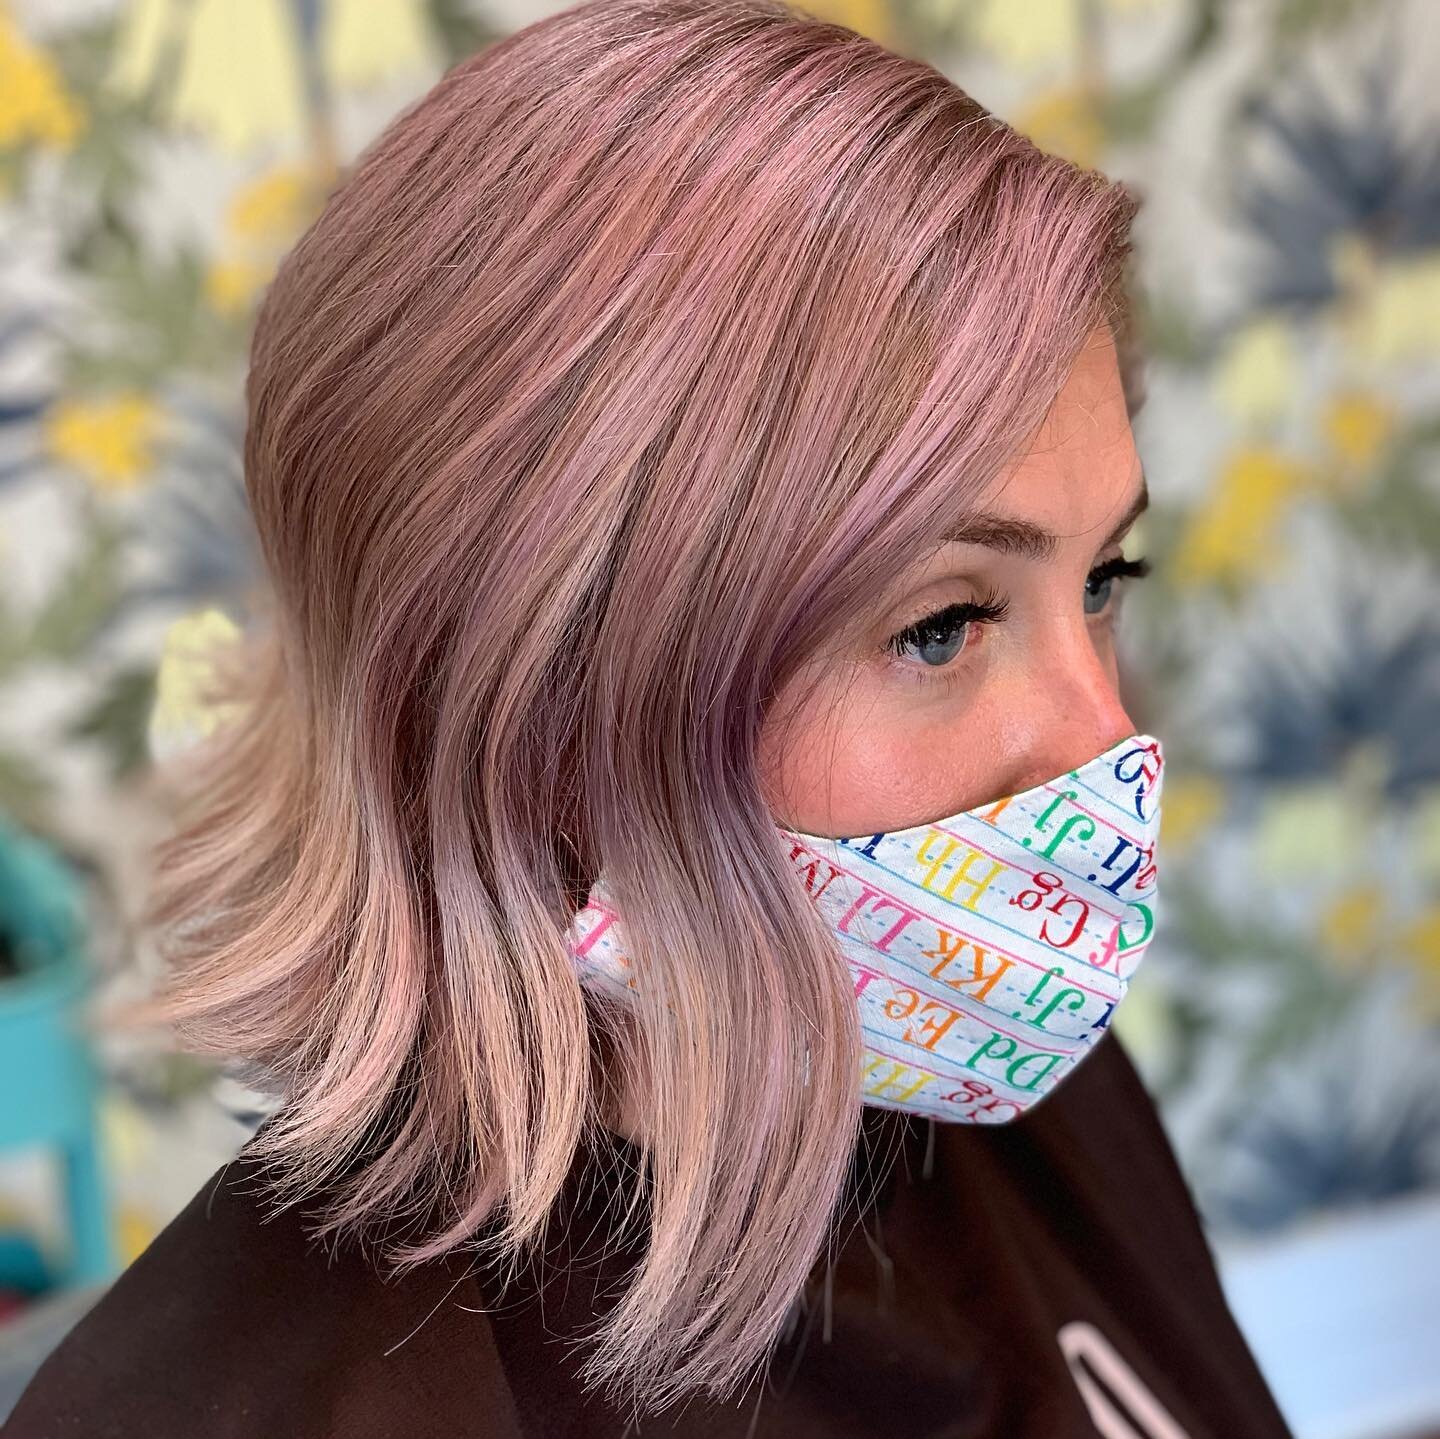 There are so many ways to execute bright Summer blonde. When fashion colors have so much dimension, you can&rsquo;t go wrong. #luckylushairparlourforall #bookdarcey